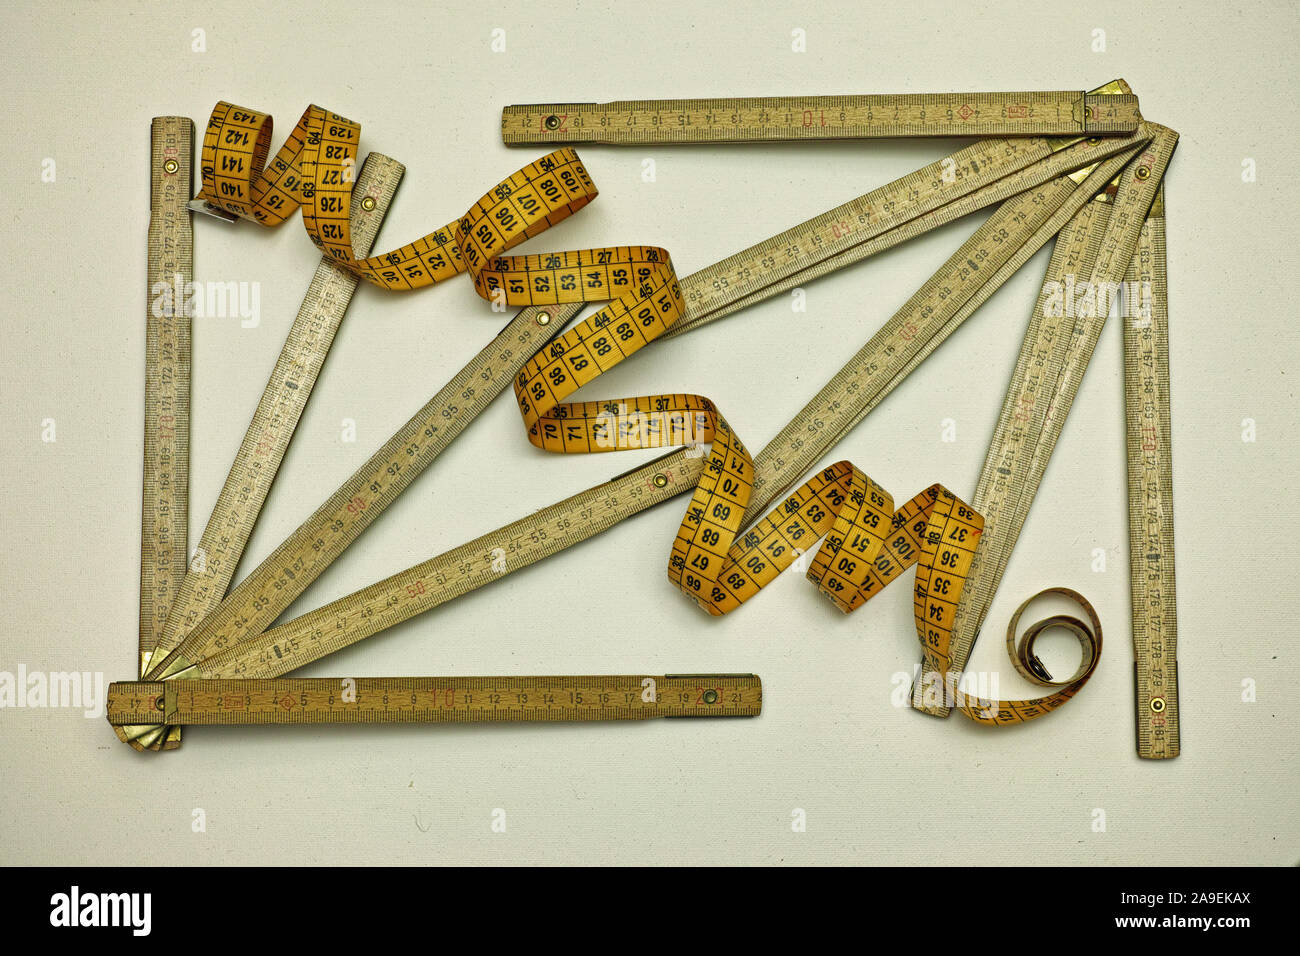 https://c8.alamy.com/comp/2A9EKAX/still-life-with-meters-for-carpenters-and-tape-for-tailoring-2A9EKAX.jpg